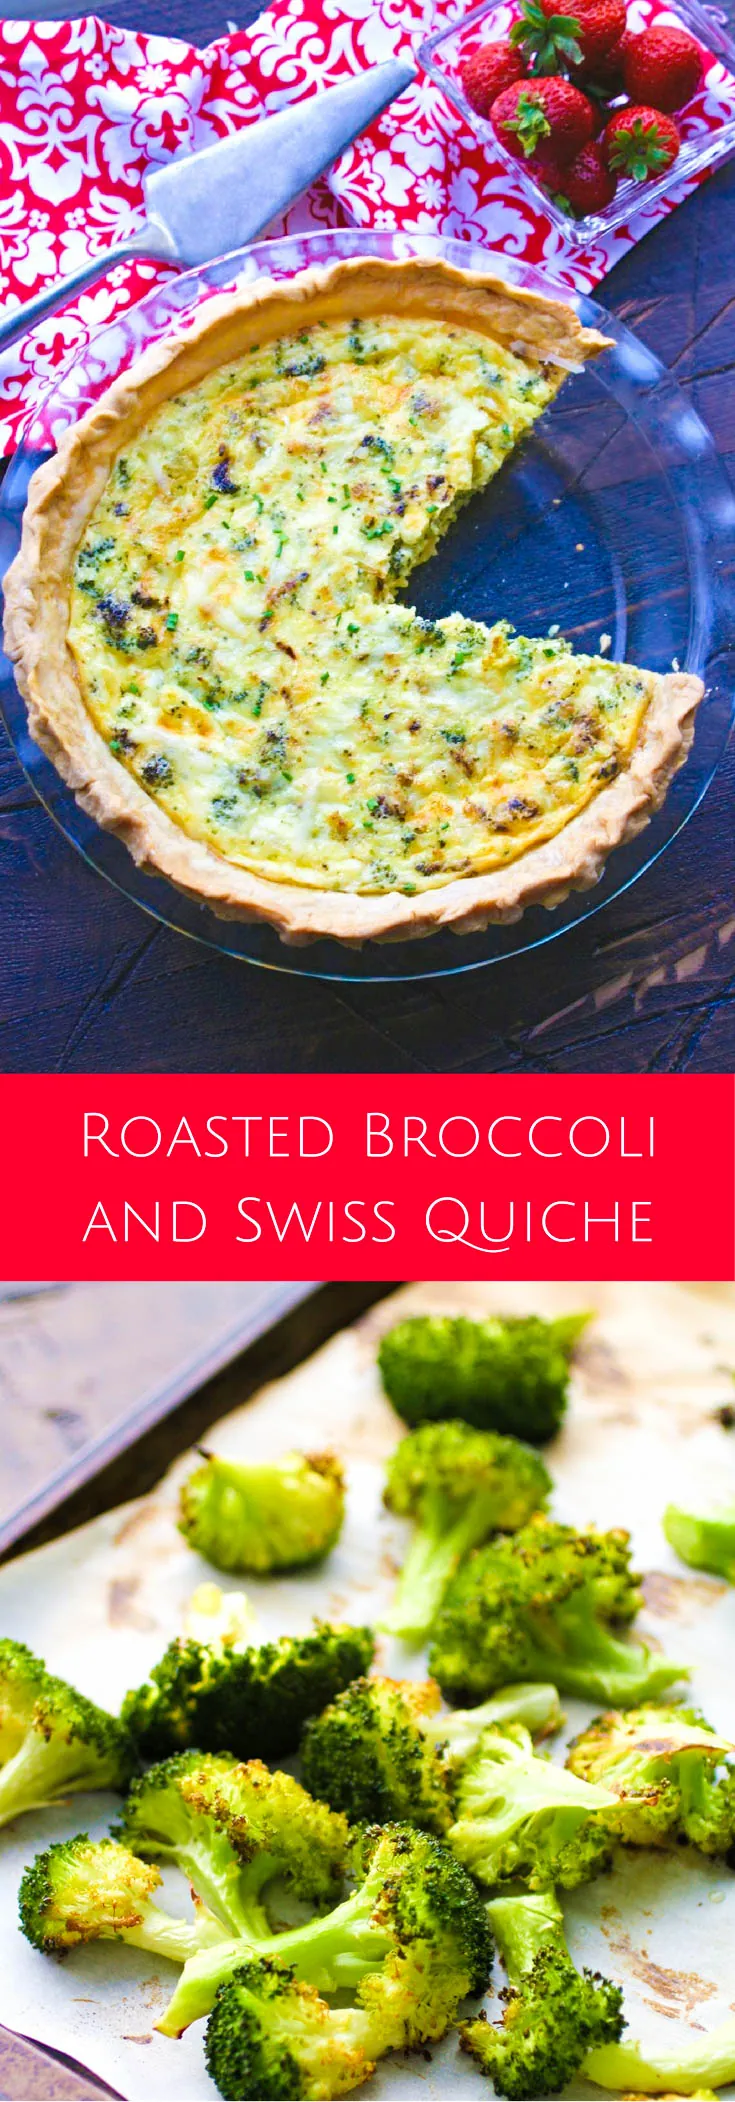 Roasted Broccoli and Swiss Quiche is a delightful dish for a special brunch, or for dinner. Roasted Broccoli and Swiss Quiche is an easy-to-make, filling and flavorful meal.